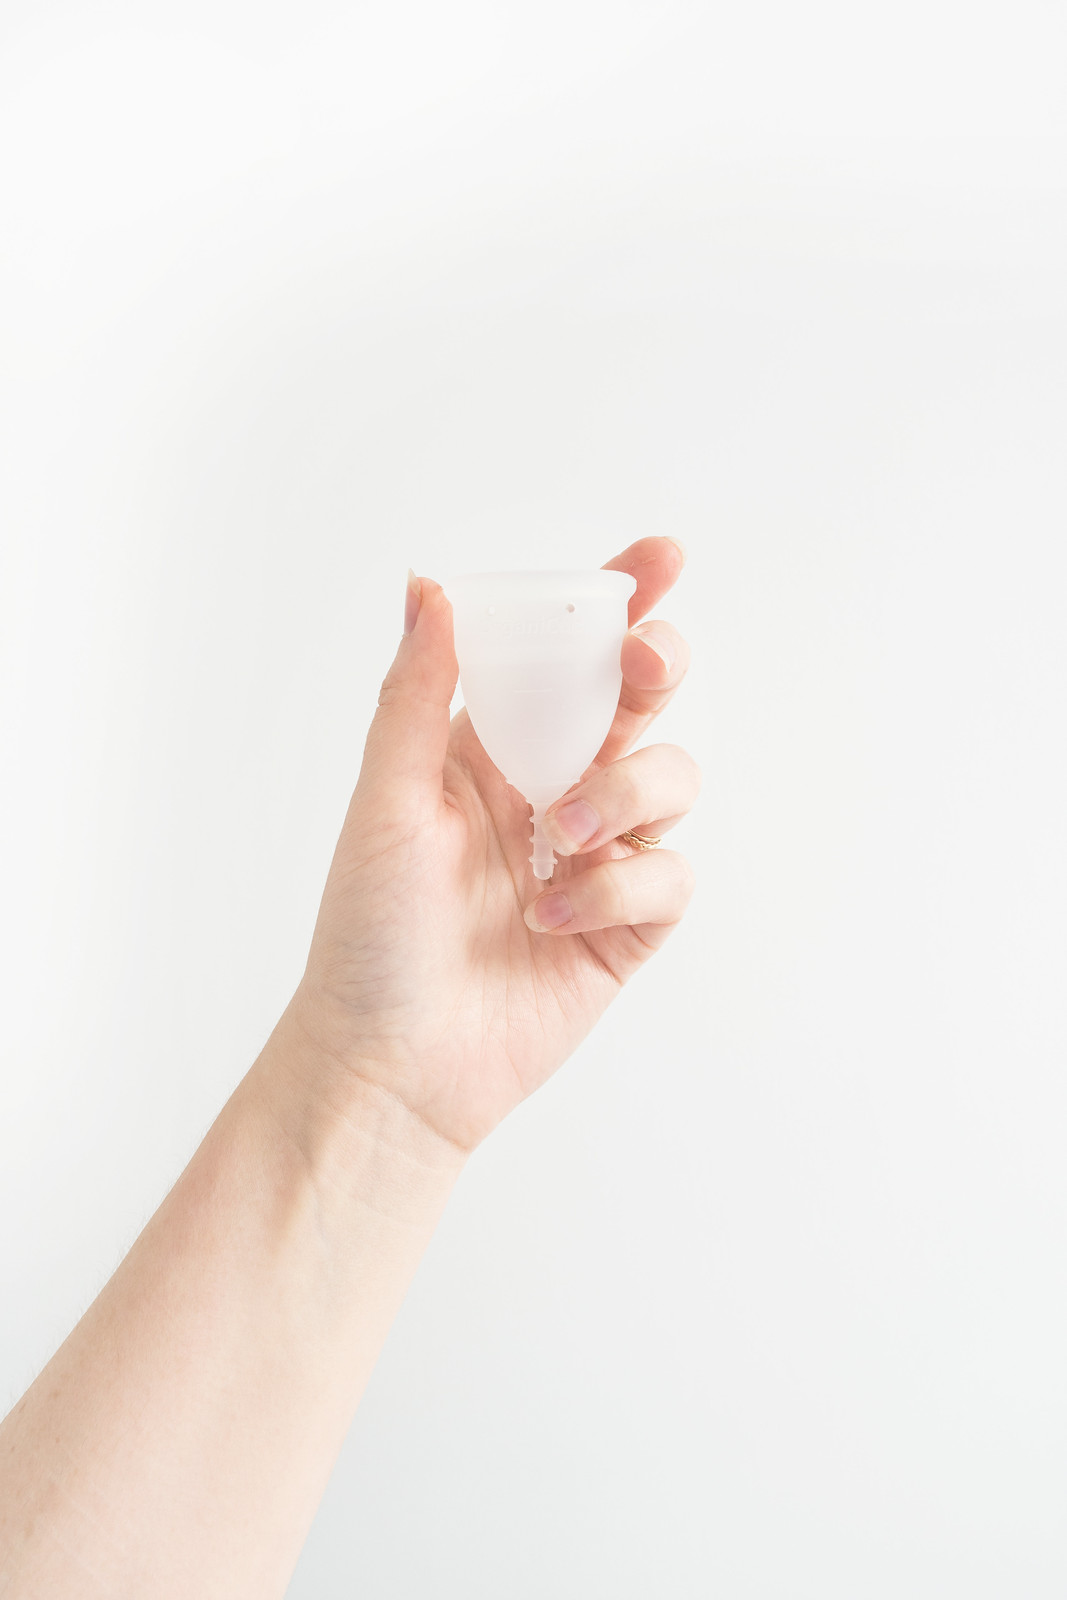 Using A Menstrual Cup with Organicup [AD]